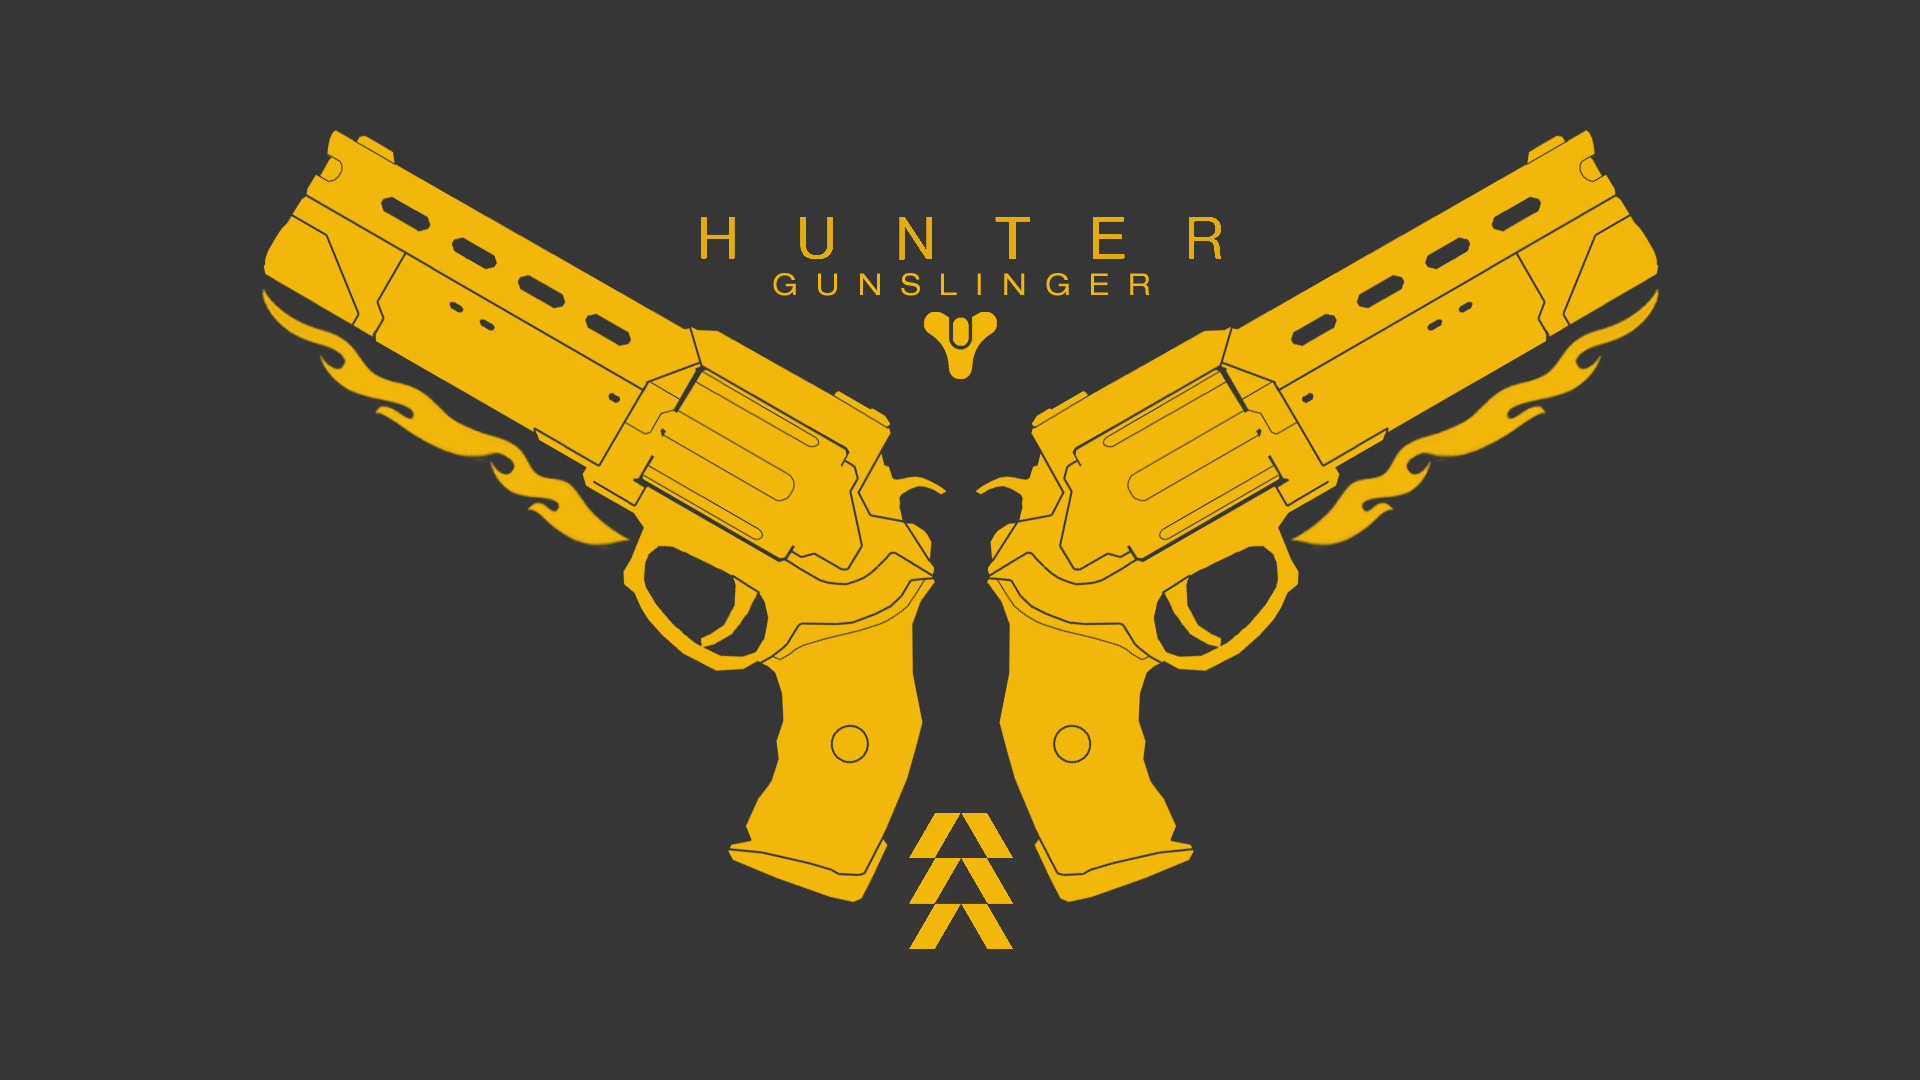 1920x1080 Here's the first follow-up to my Bladedancer wallpaper. This one's for the  Gunslingers!